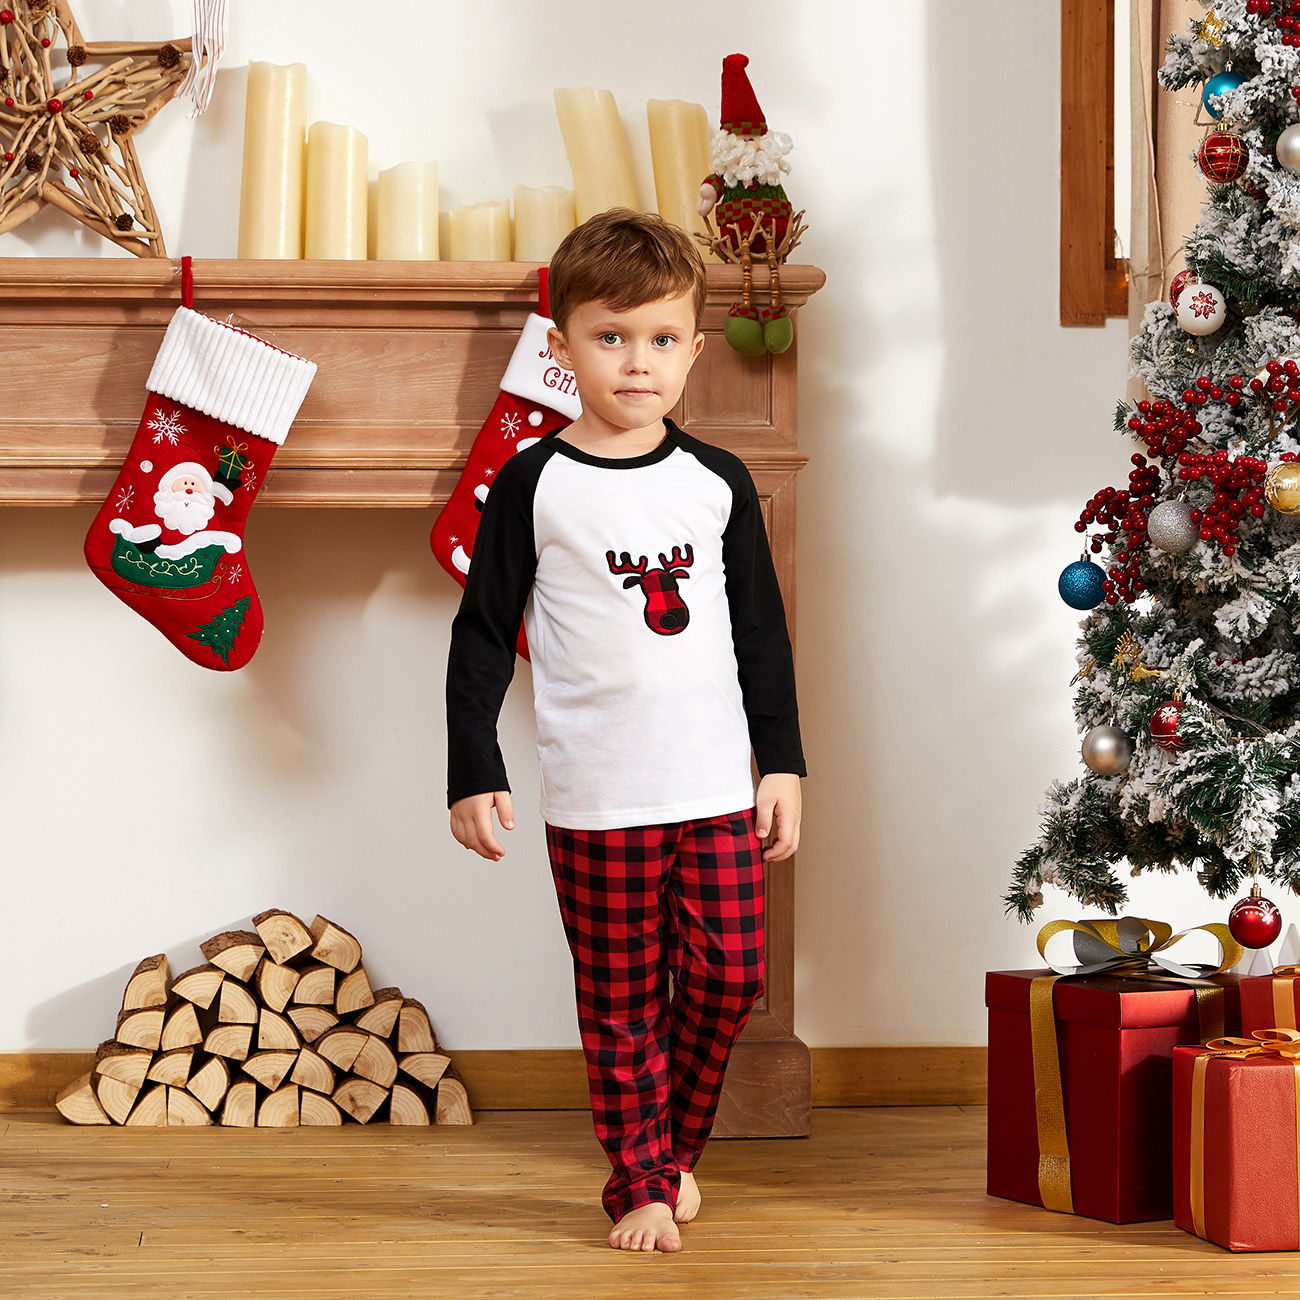 PatPat Black/White Mommy and Me Christmas Plaid Deer Family Matching Pajamas 2-piece,Unisex - image 4 of 12